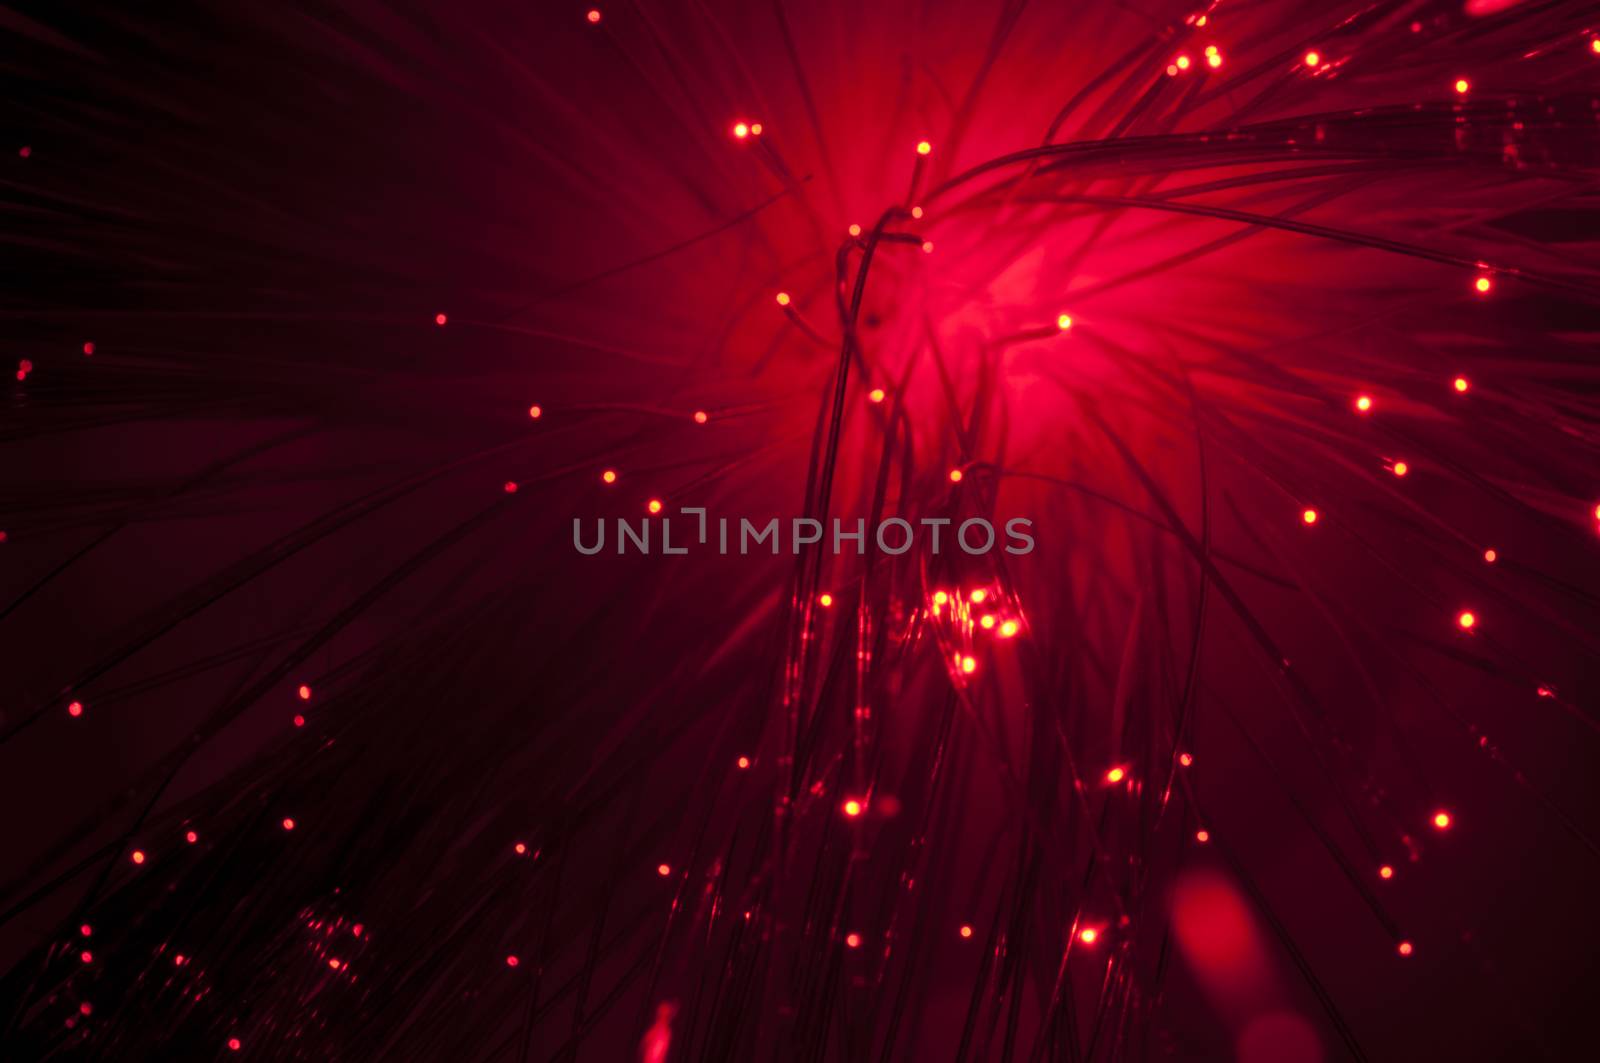 Optical fibers of fiber optic cable. Internet technology.Red color